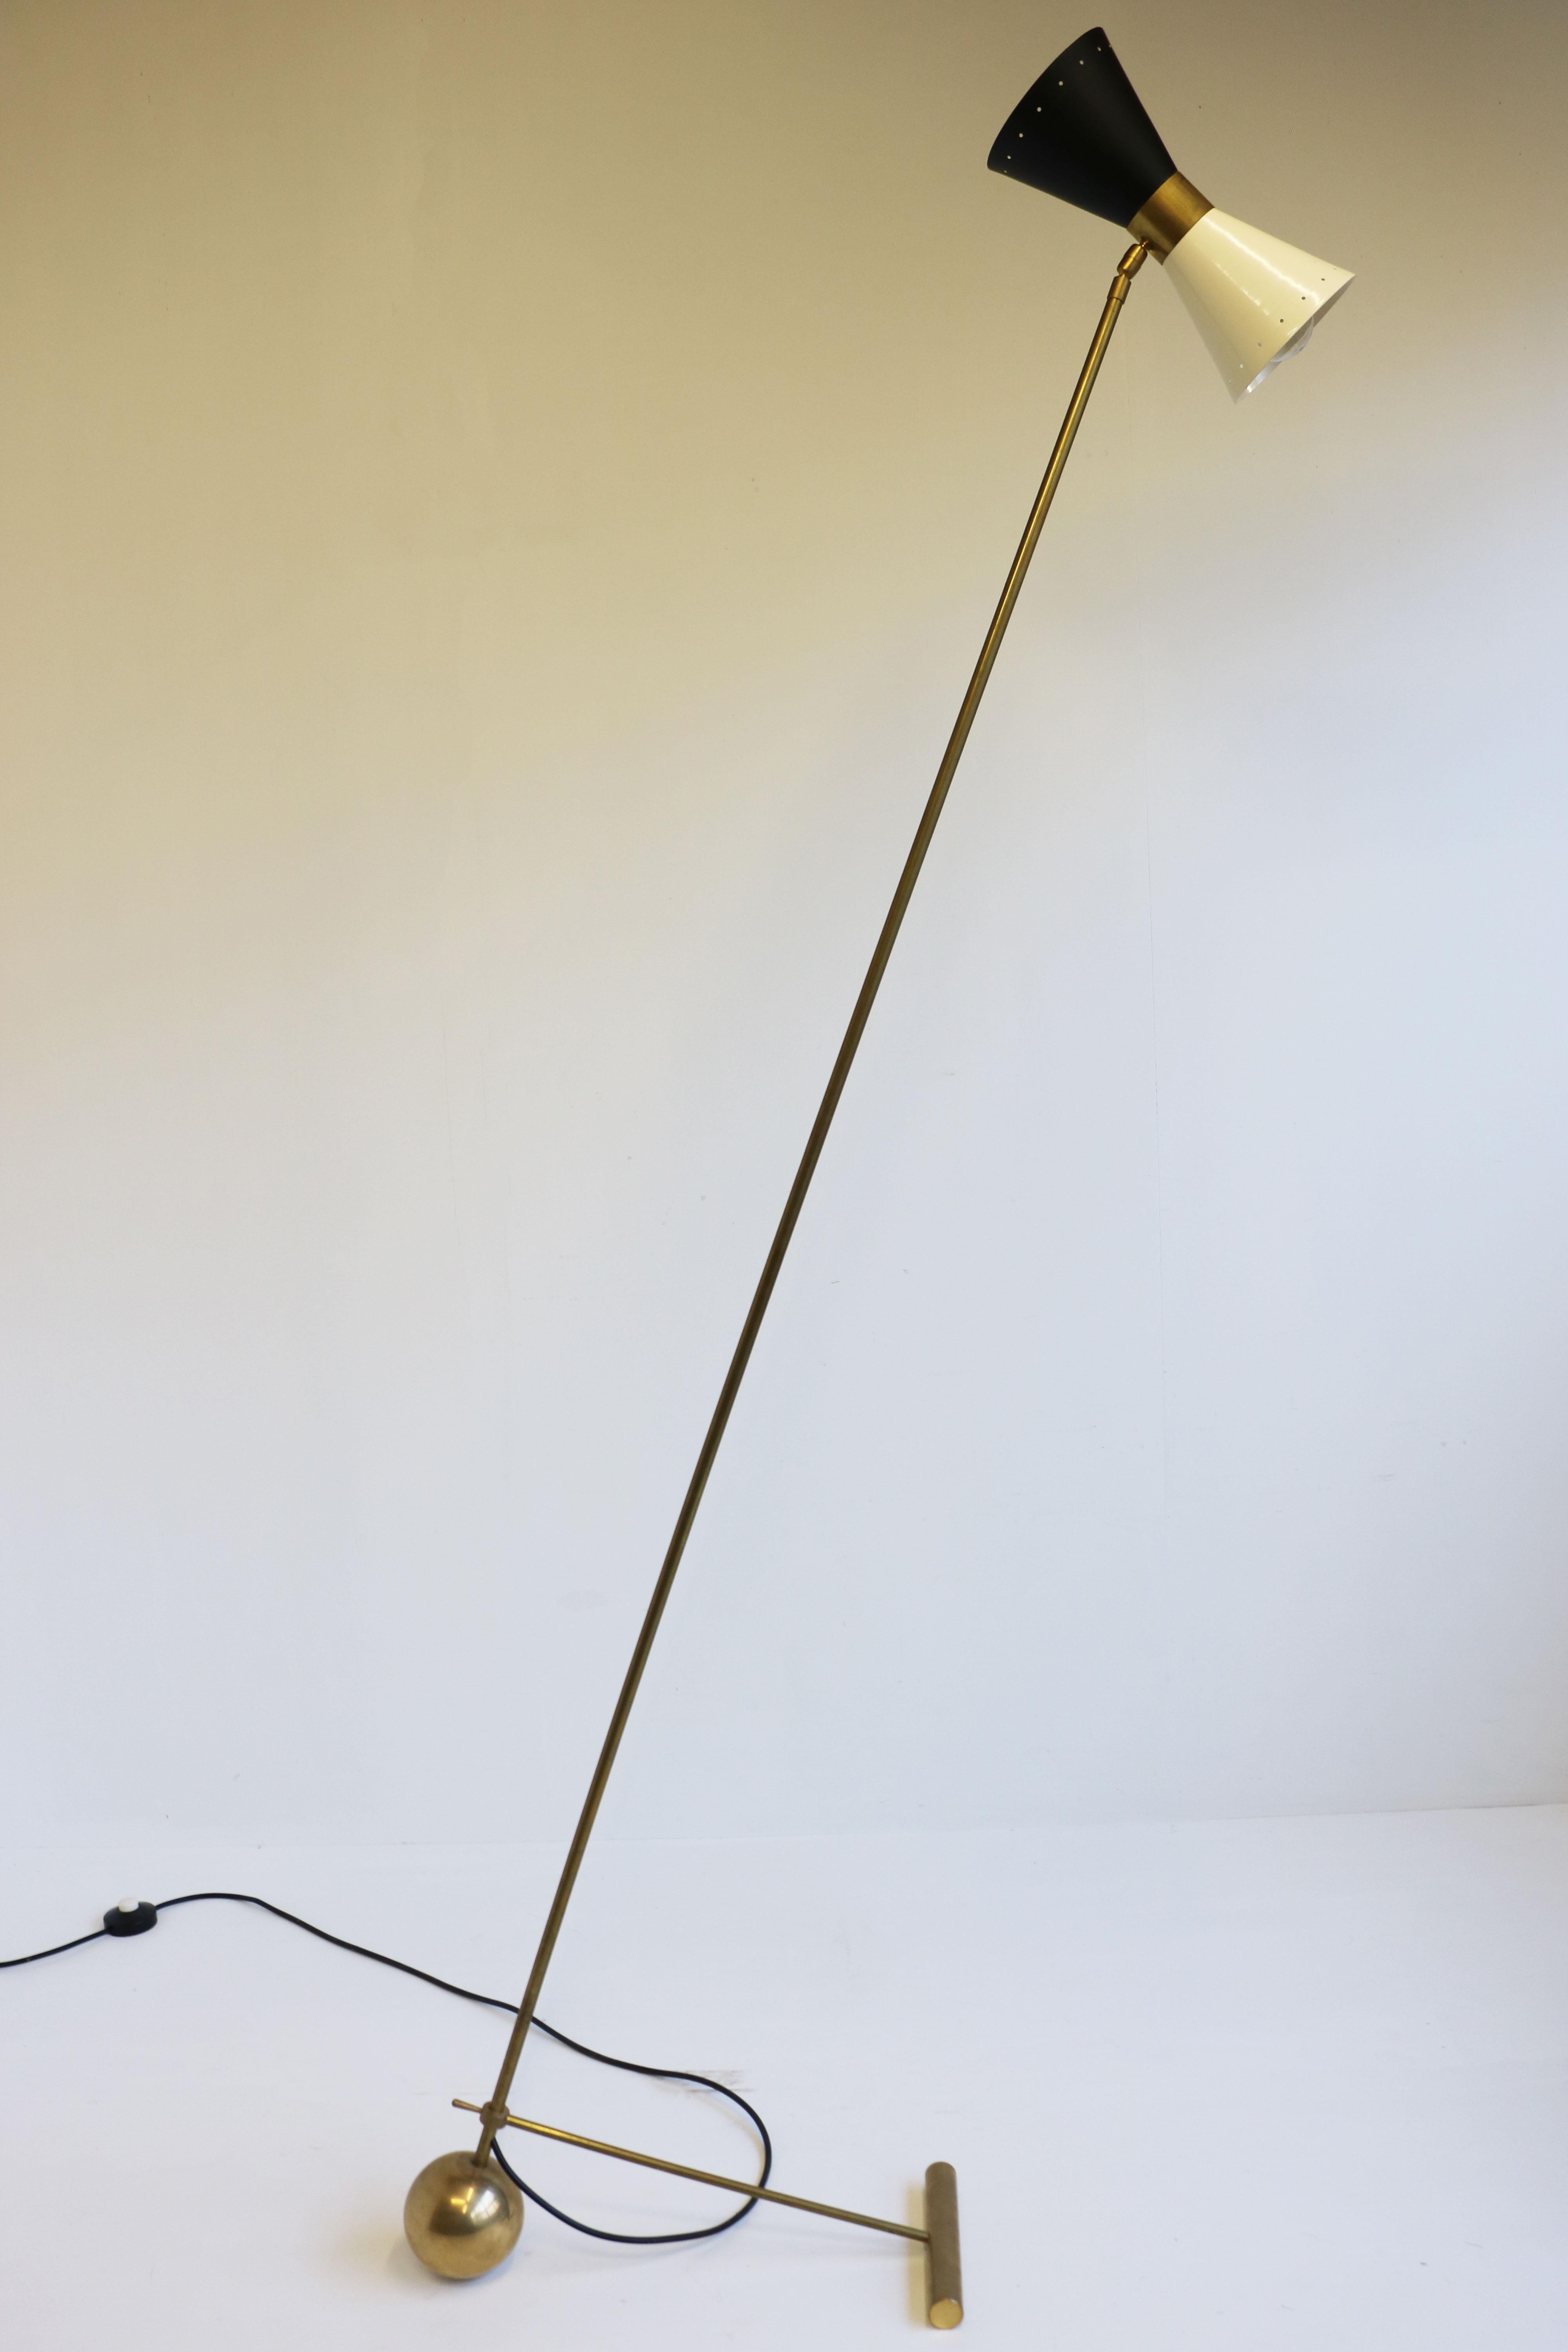 Gorgeous minimalist Italian design floor lamp in style of Stilnovo 1950. 
Frame made out of patinated brass with unique minimalist design base. Gorgeous diabolo shaped shade in black & white. Timeless design ! 
The angle of the floor lamp & the